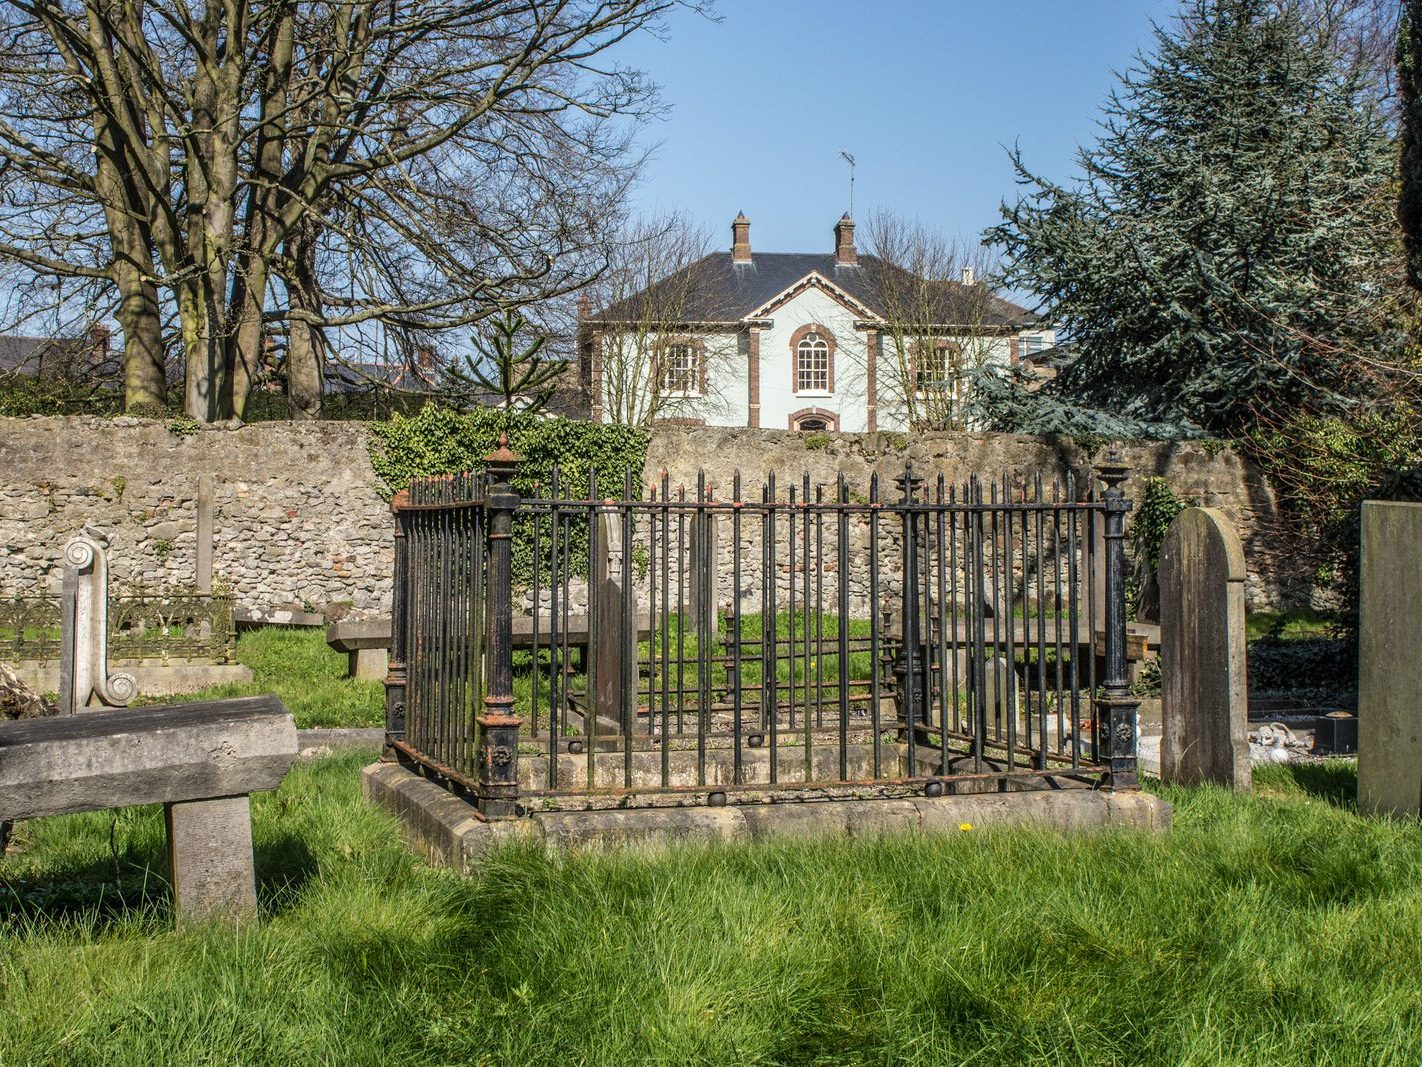 SOME OLD IMAGES OF ST PETERS CHURCHYARD IN DROGHEDA [PHOTOGRAPHED 20212]-224235-1